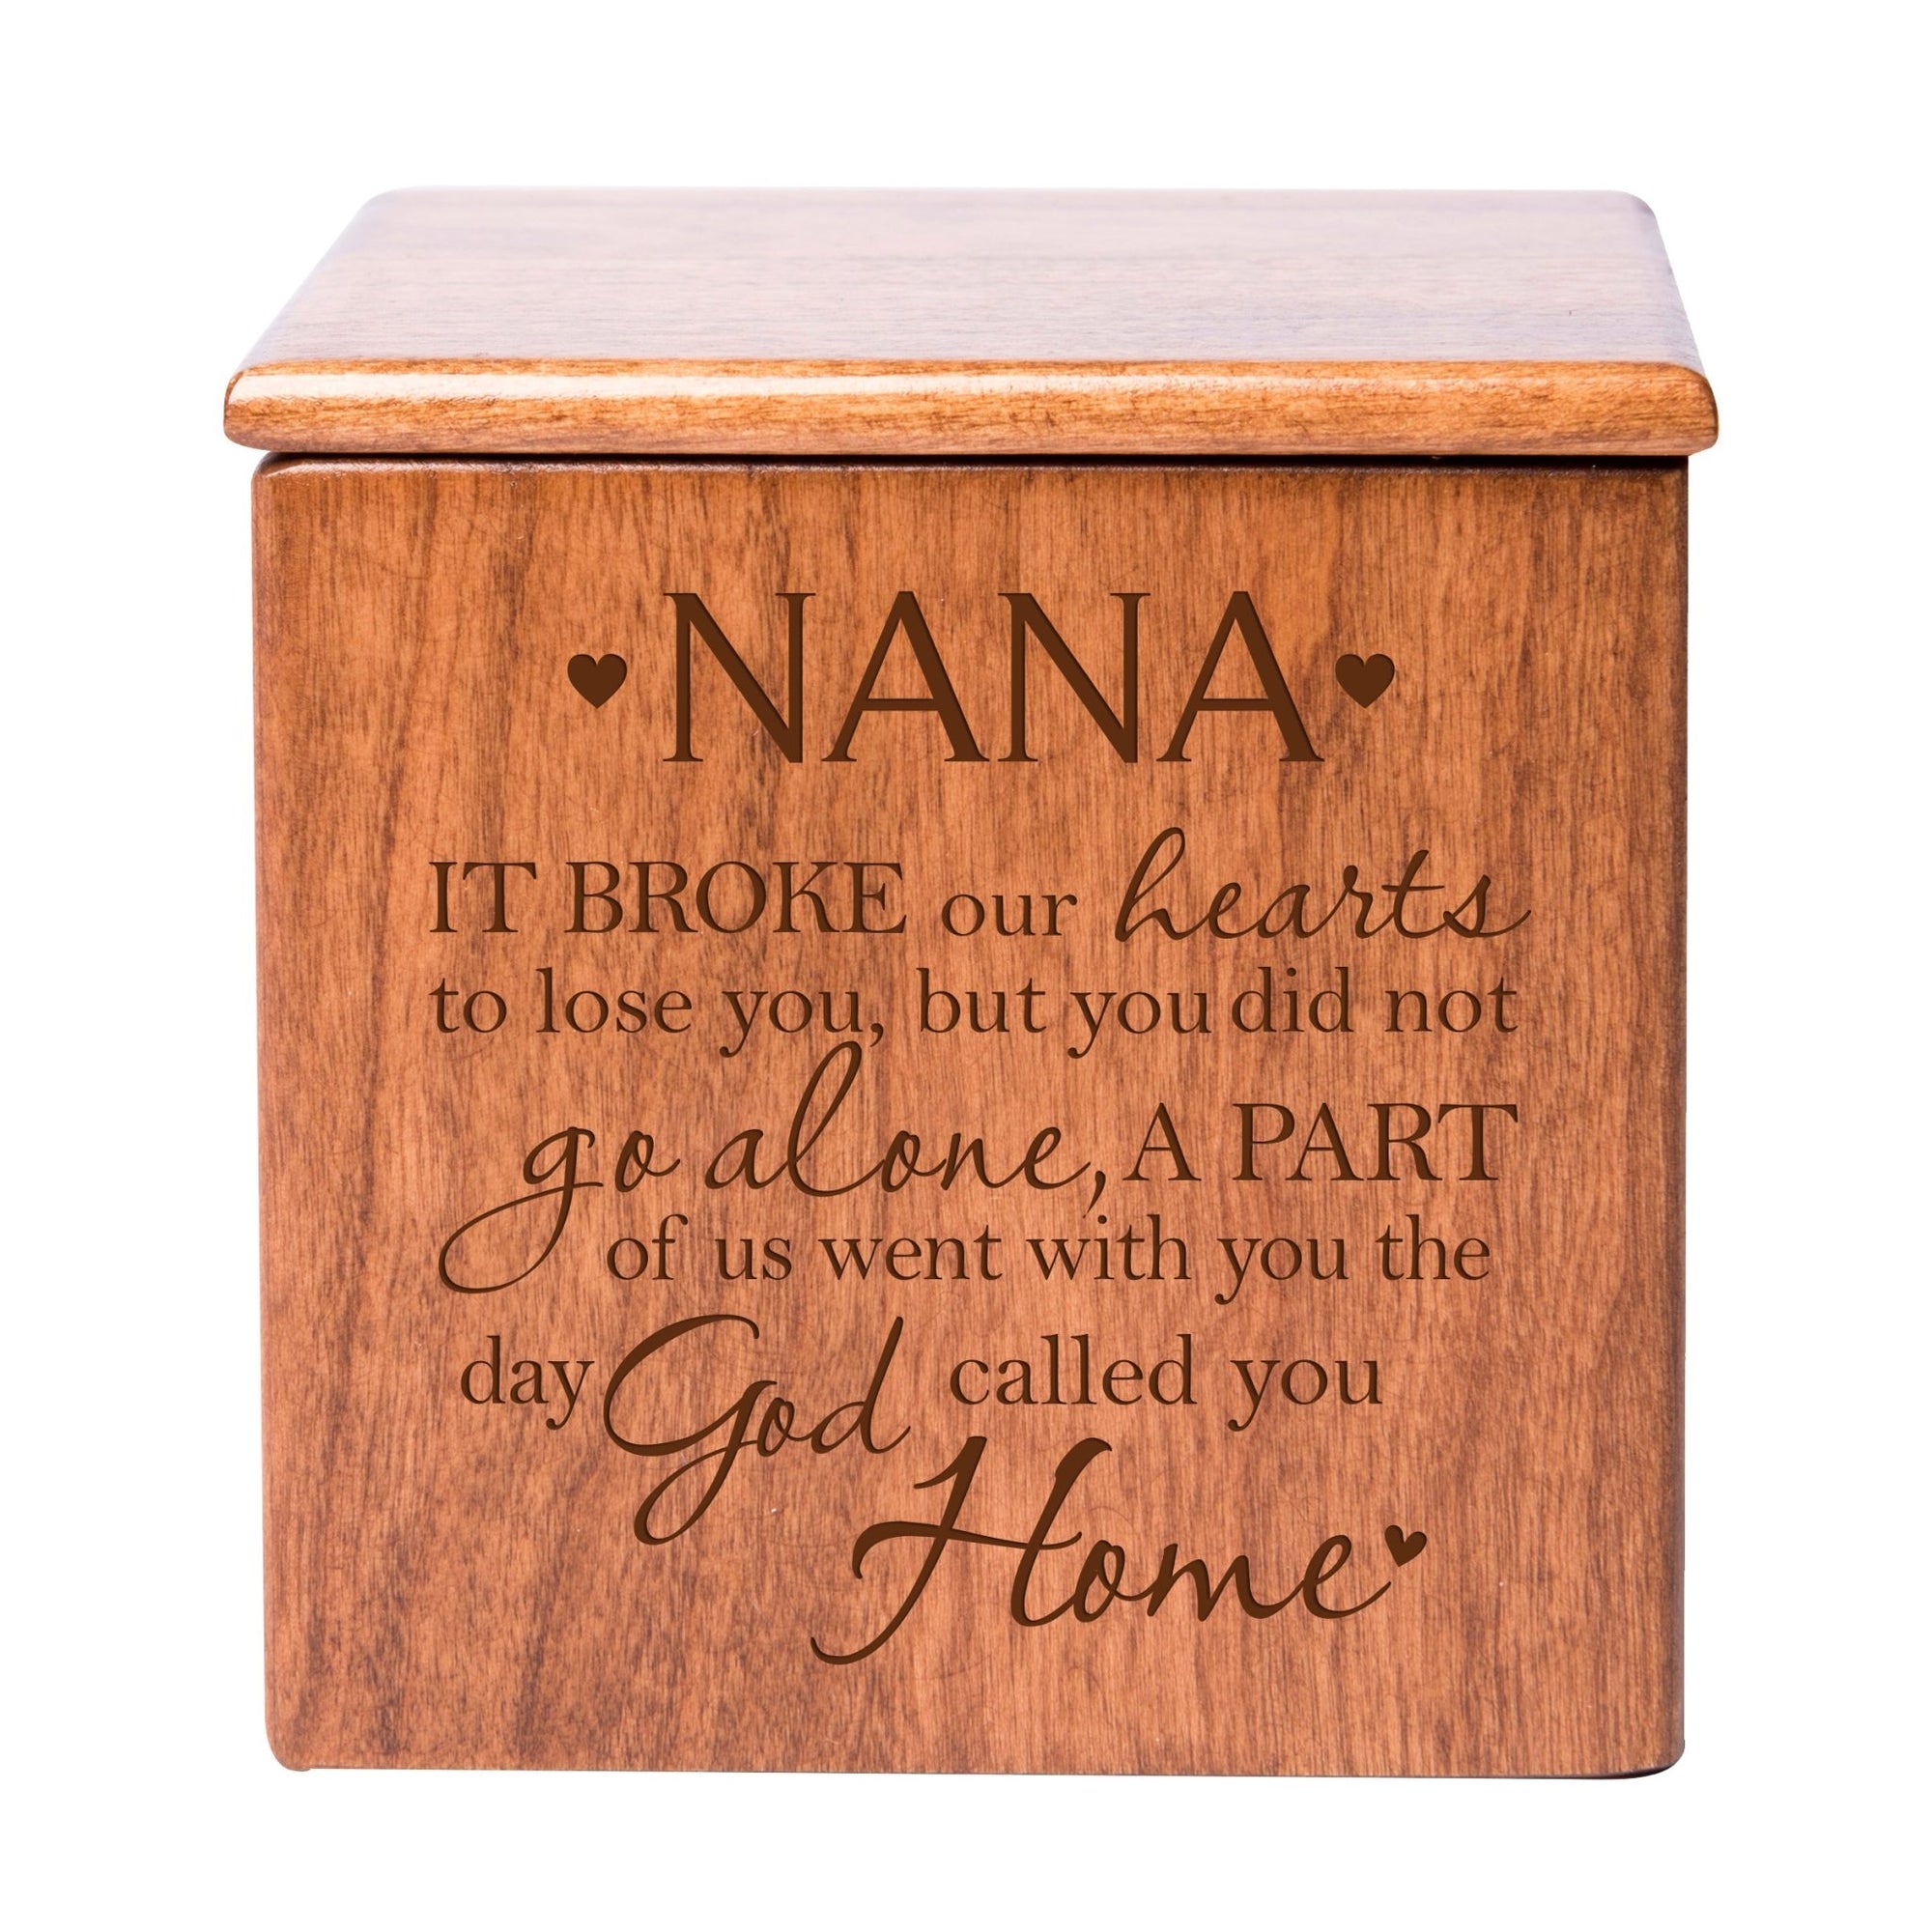 Modern Inspirational Memorial Wooden Cremation Urn Box 4.5x4.5in Holds 49 Cu Inches Of Human Ashes (It Broke Our Hearts Nana) Funeral and Commemorative Keepsake - LifeSong Milestones